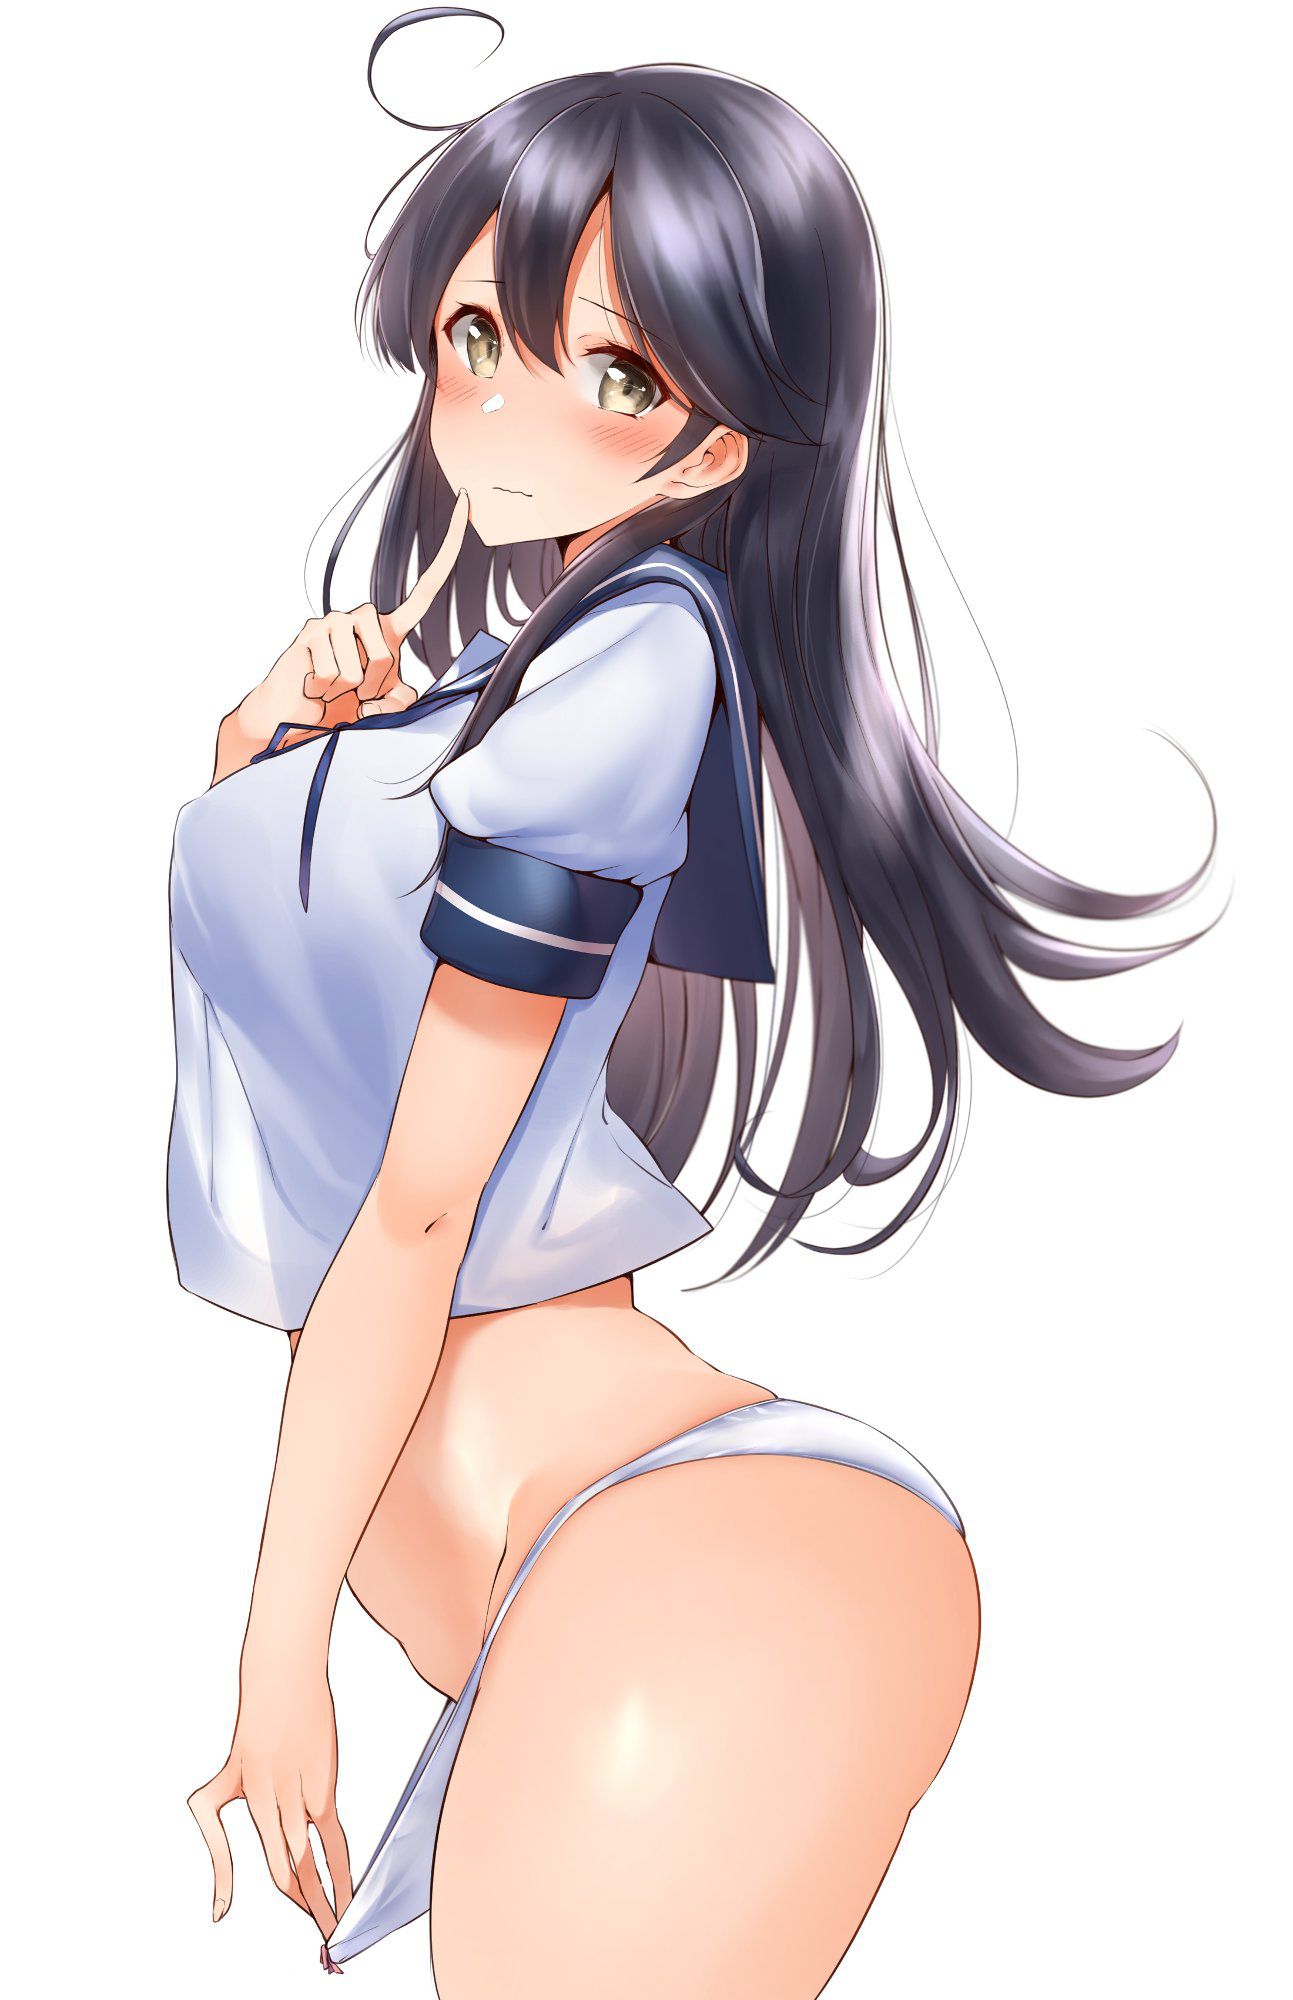 Erotic anime summary Erotic image collection of beautiful girls and beautiful girls with full pants because there is no skirt [50 pieces] 51